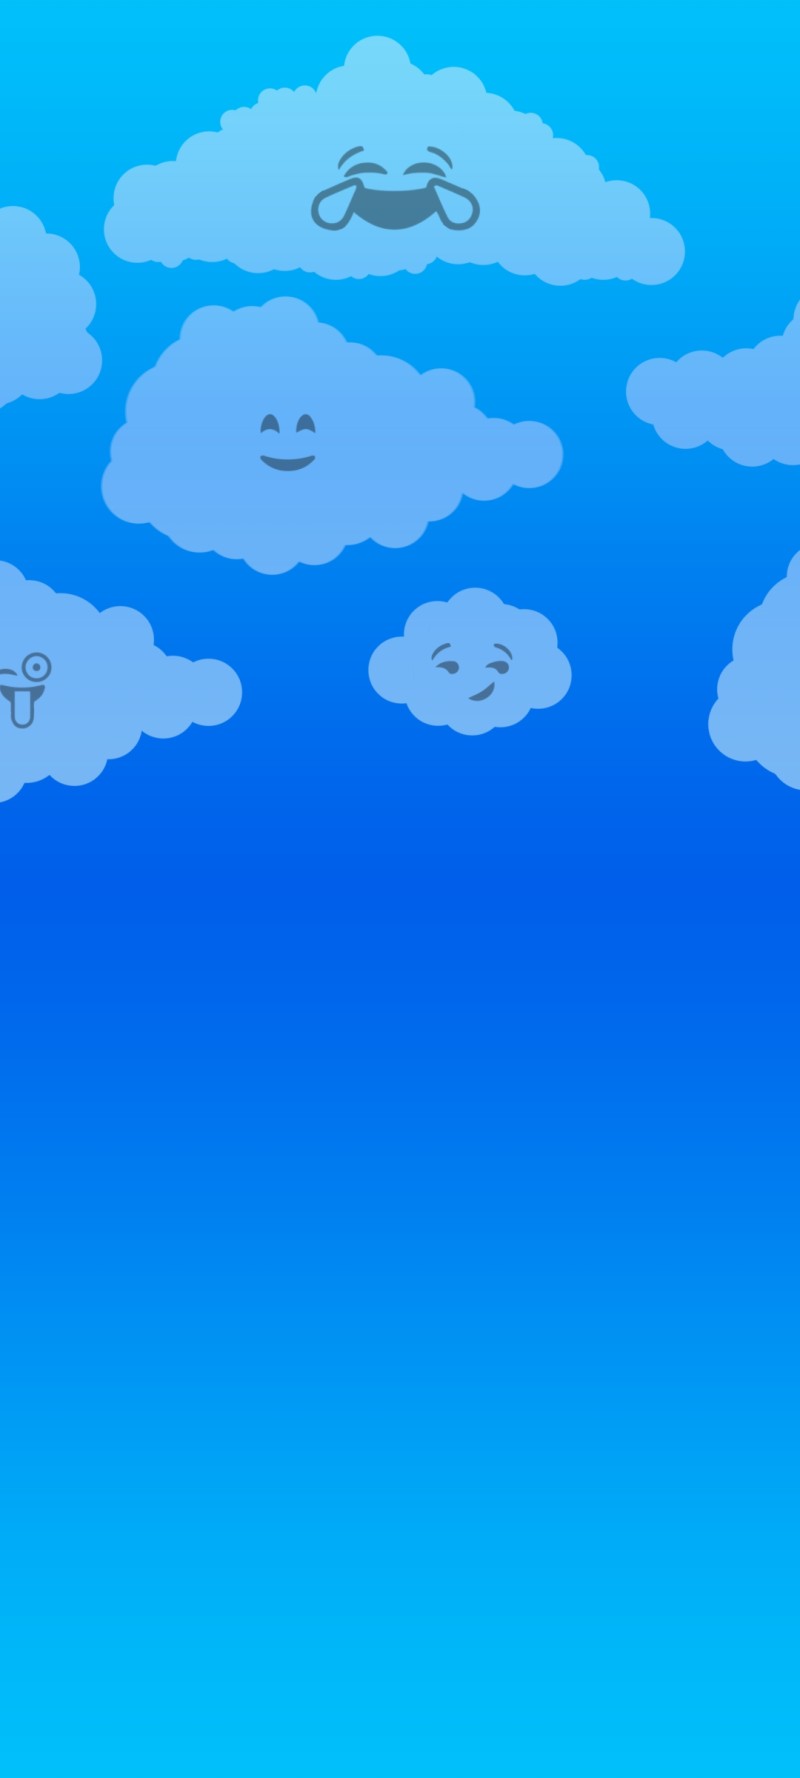 Minimalism, Clouds, Smiling, Simple Background Wallpaper